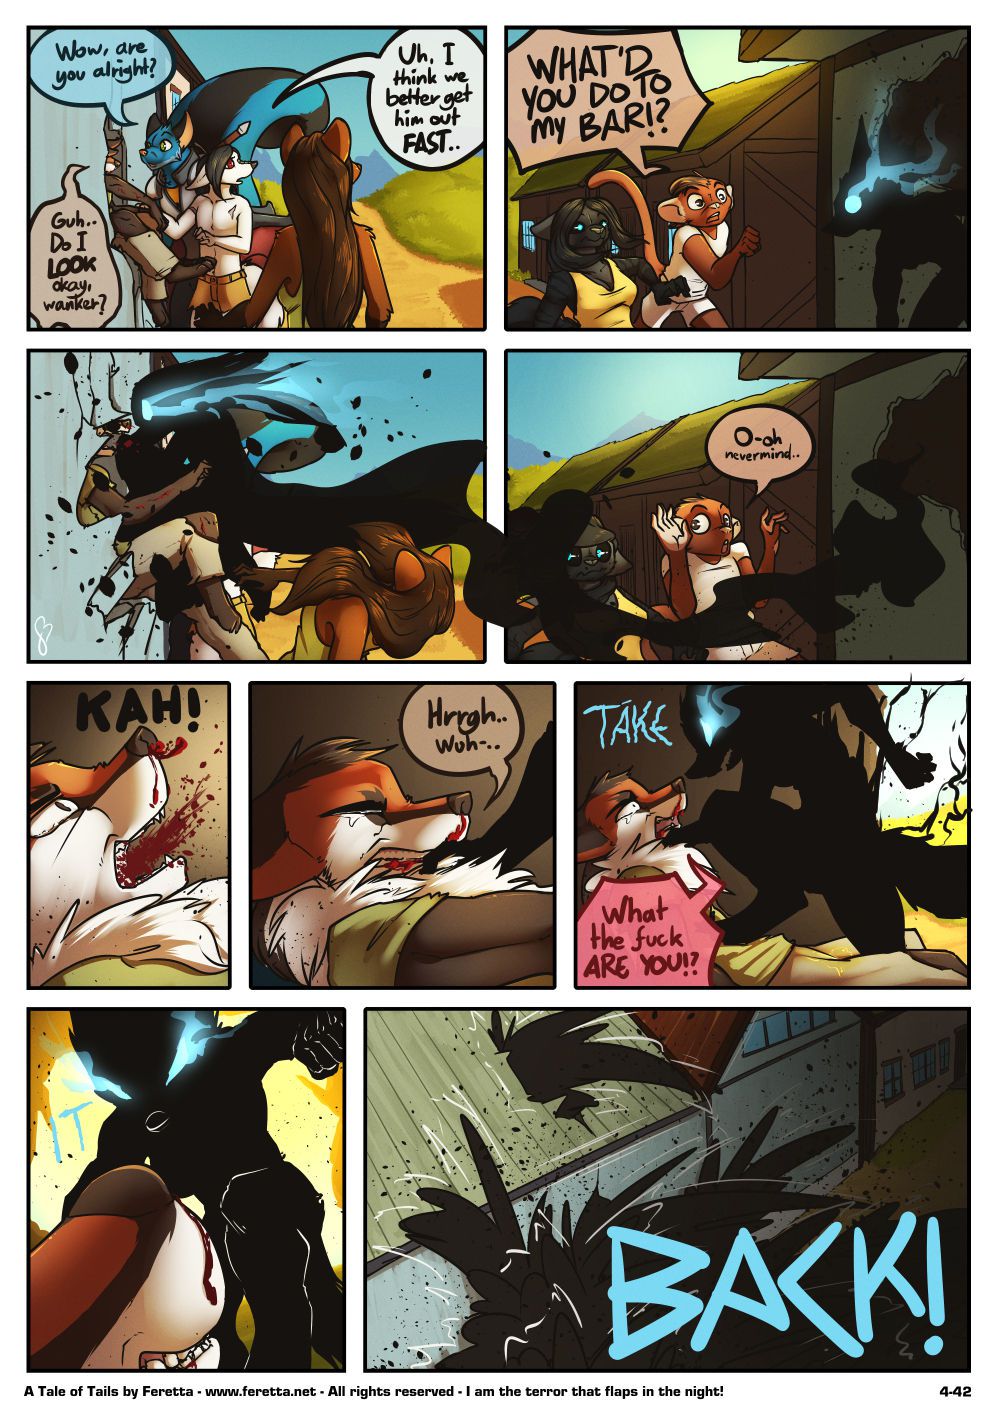 [Feretta] Farellian Legends: A Tale of Tails (w/Extras) [Ongoing] 192